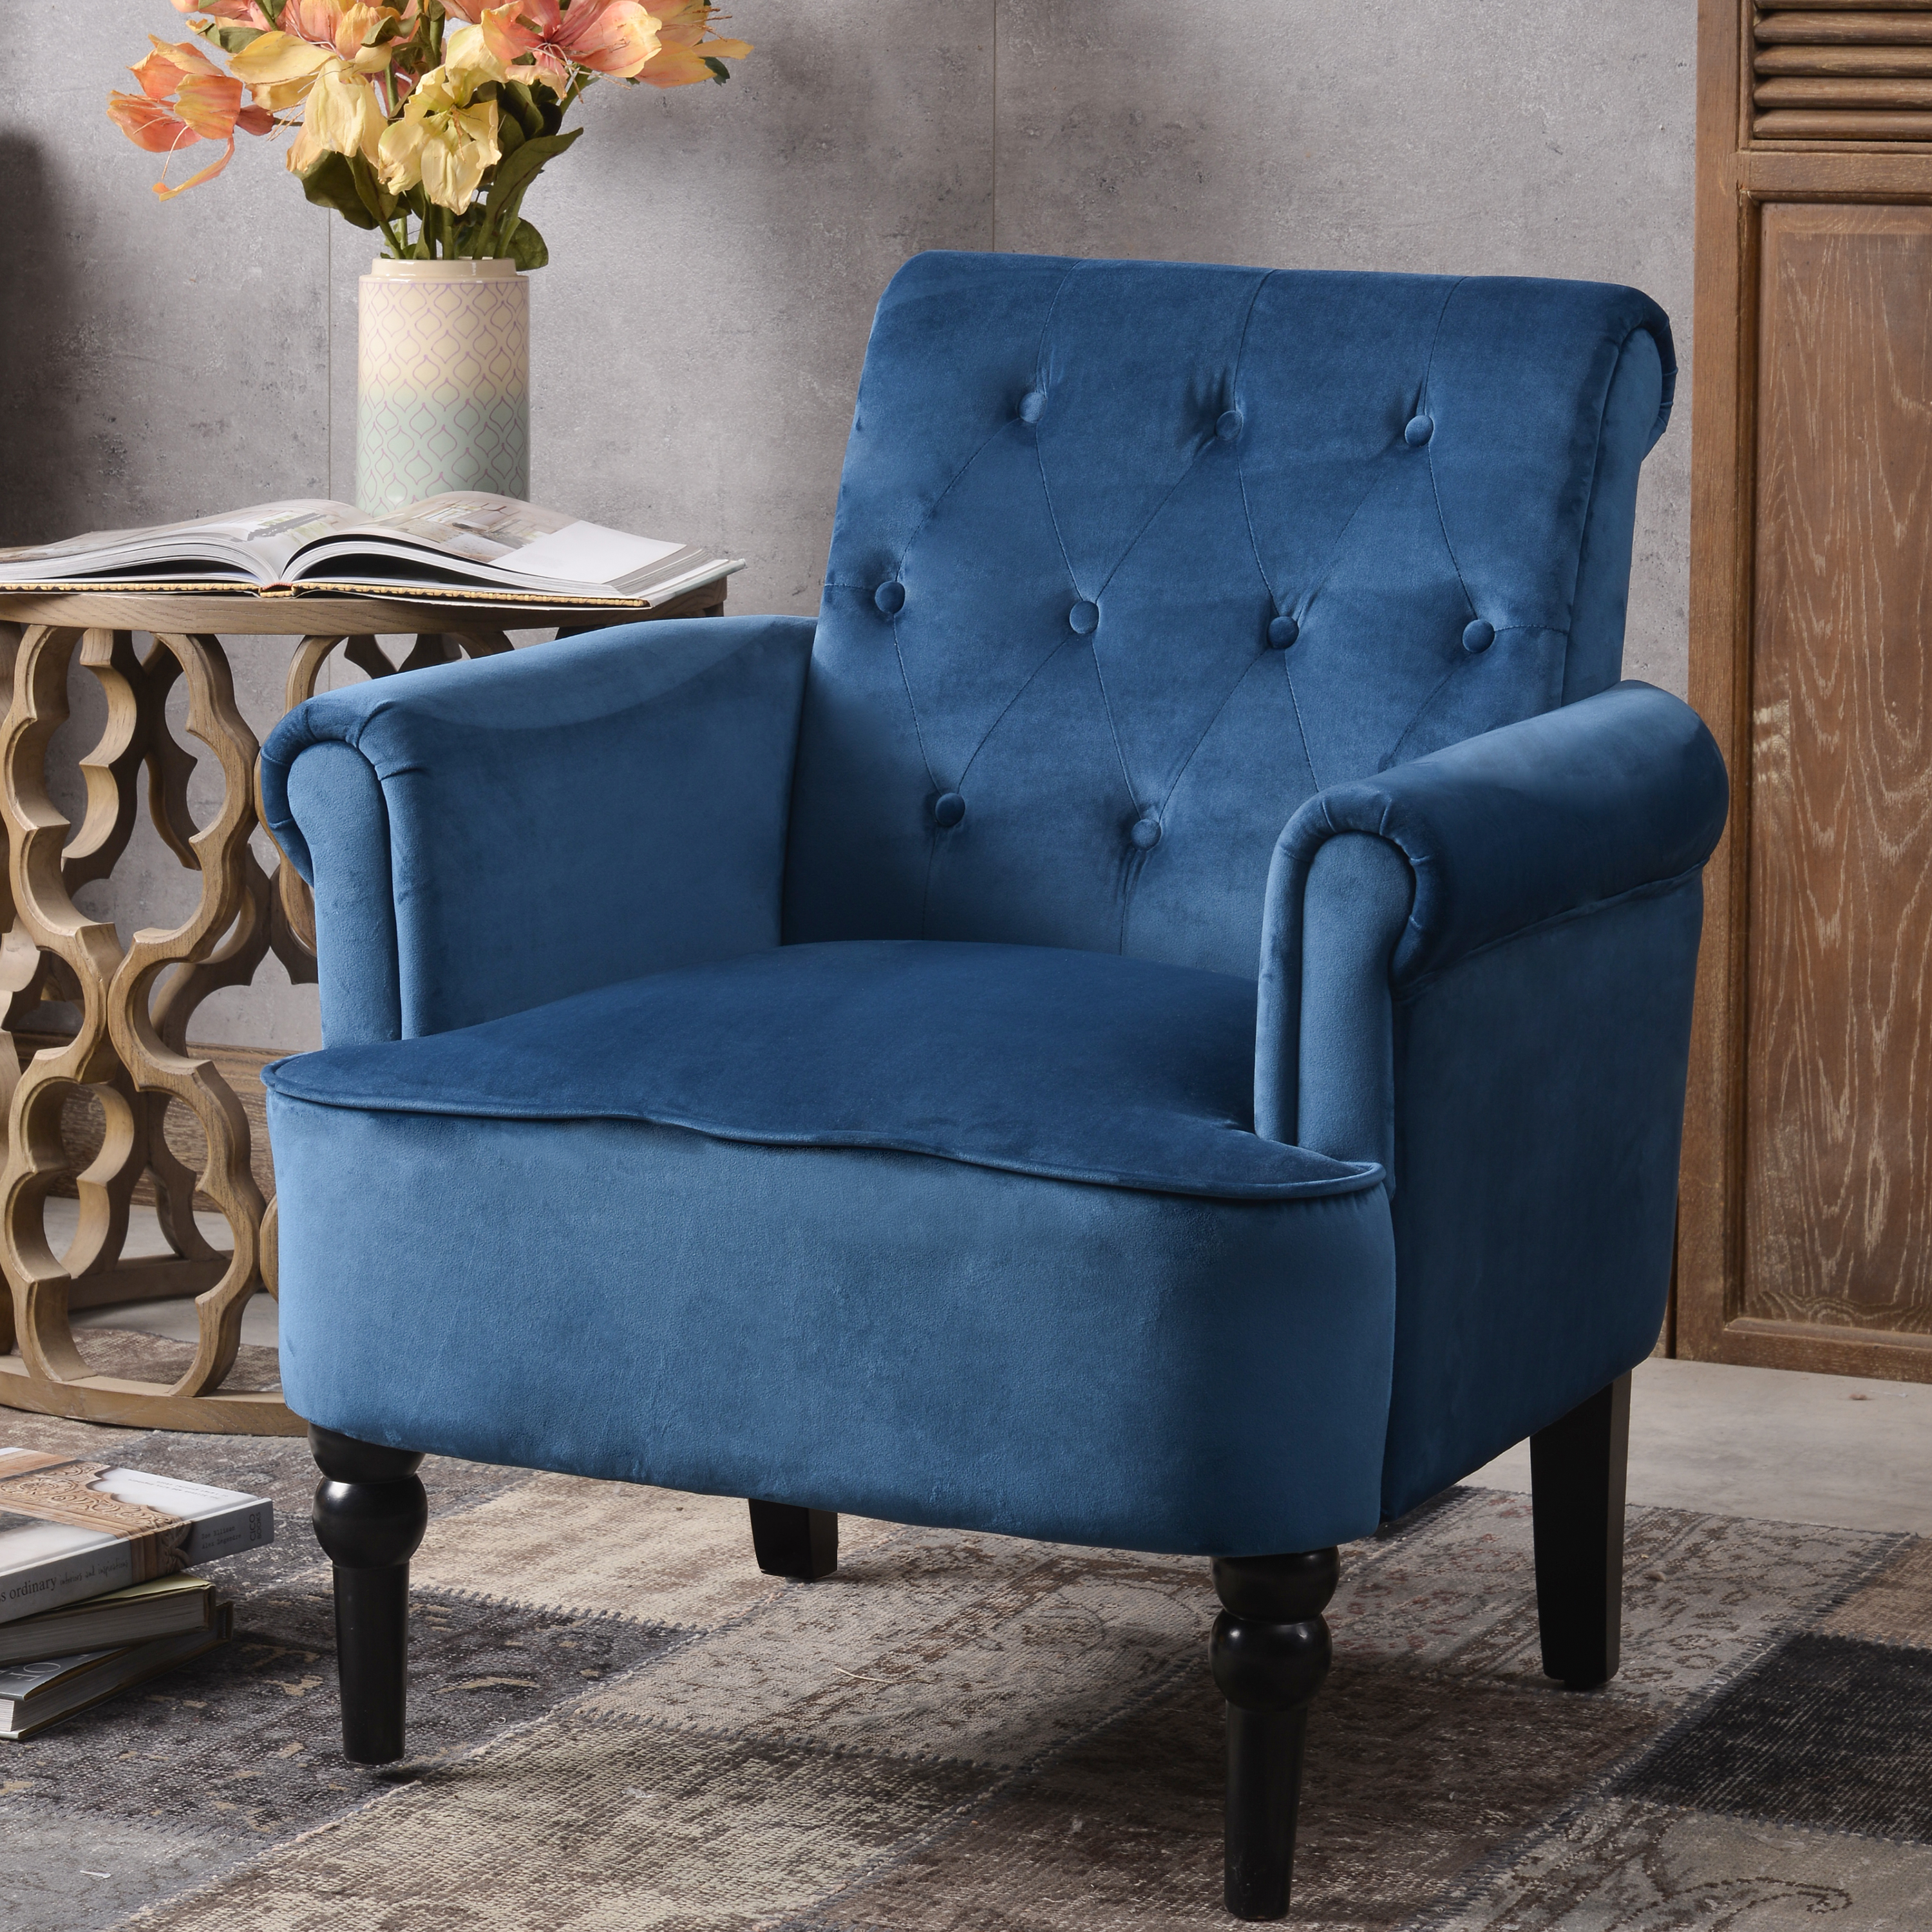 Elegant Button Tufted Club Chair Accent Armchairs Roll Arm Living Room Cushion with Wooden Legs, Navy Blue-Boyel Living